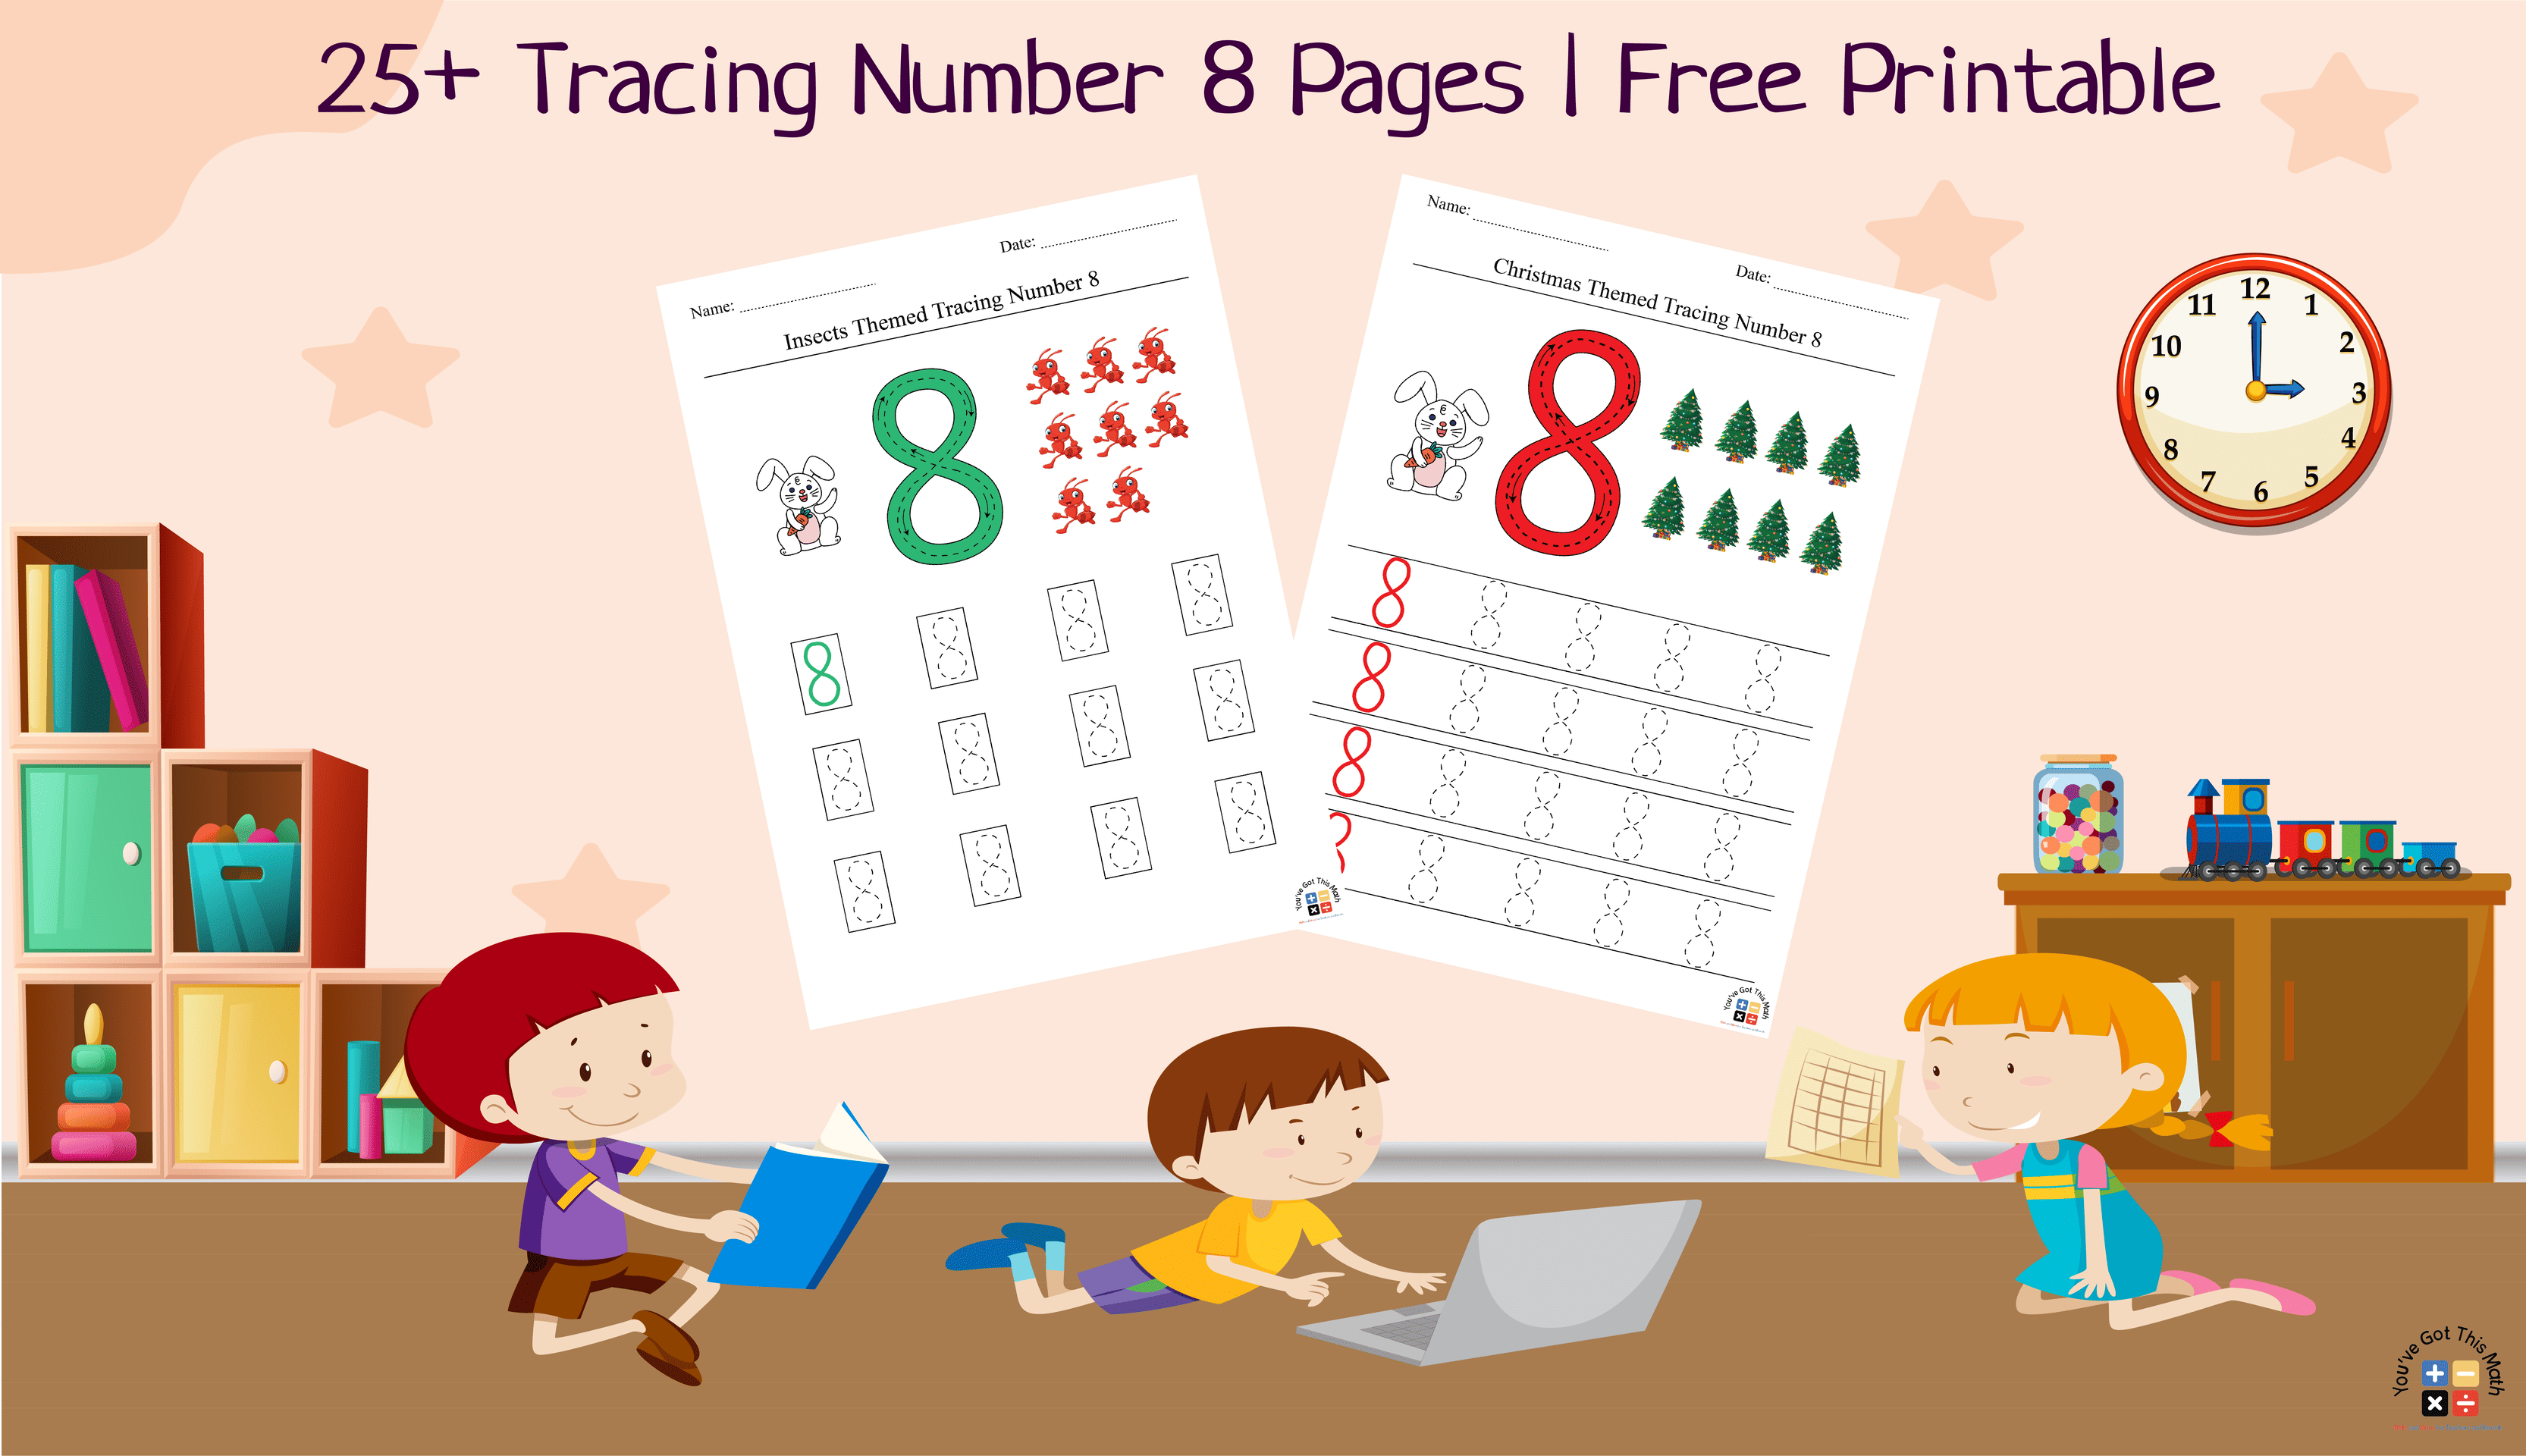 25+ Tracing Number 8 Pages | Free Printable